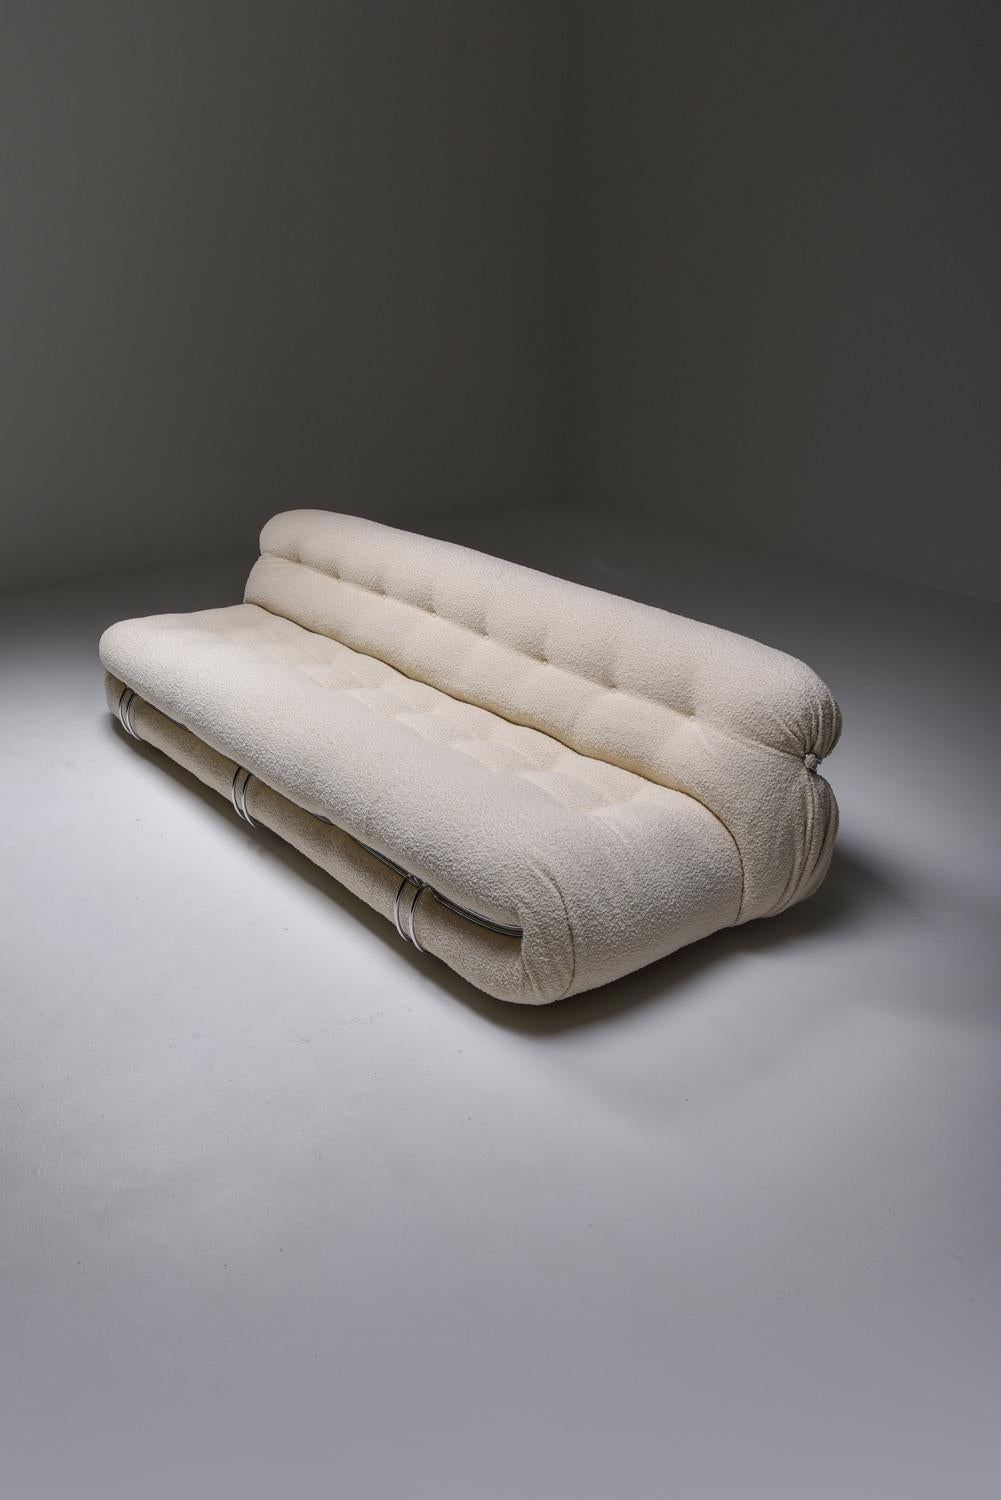 Cassina 'Soriana' Four Seater Sofa by Afra and Tobia Scarpa in Bouclé 3